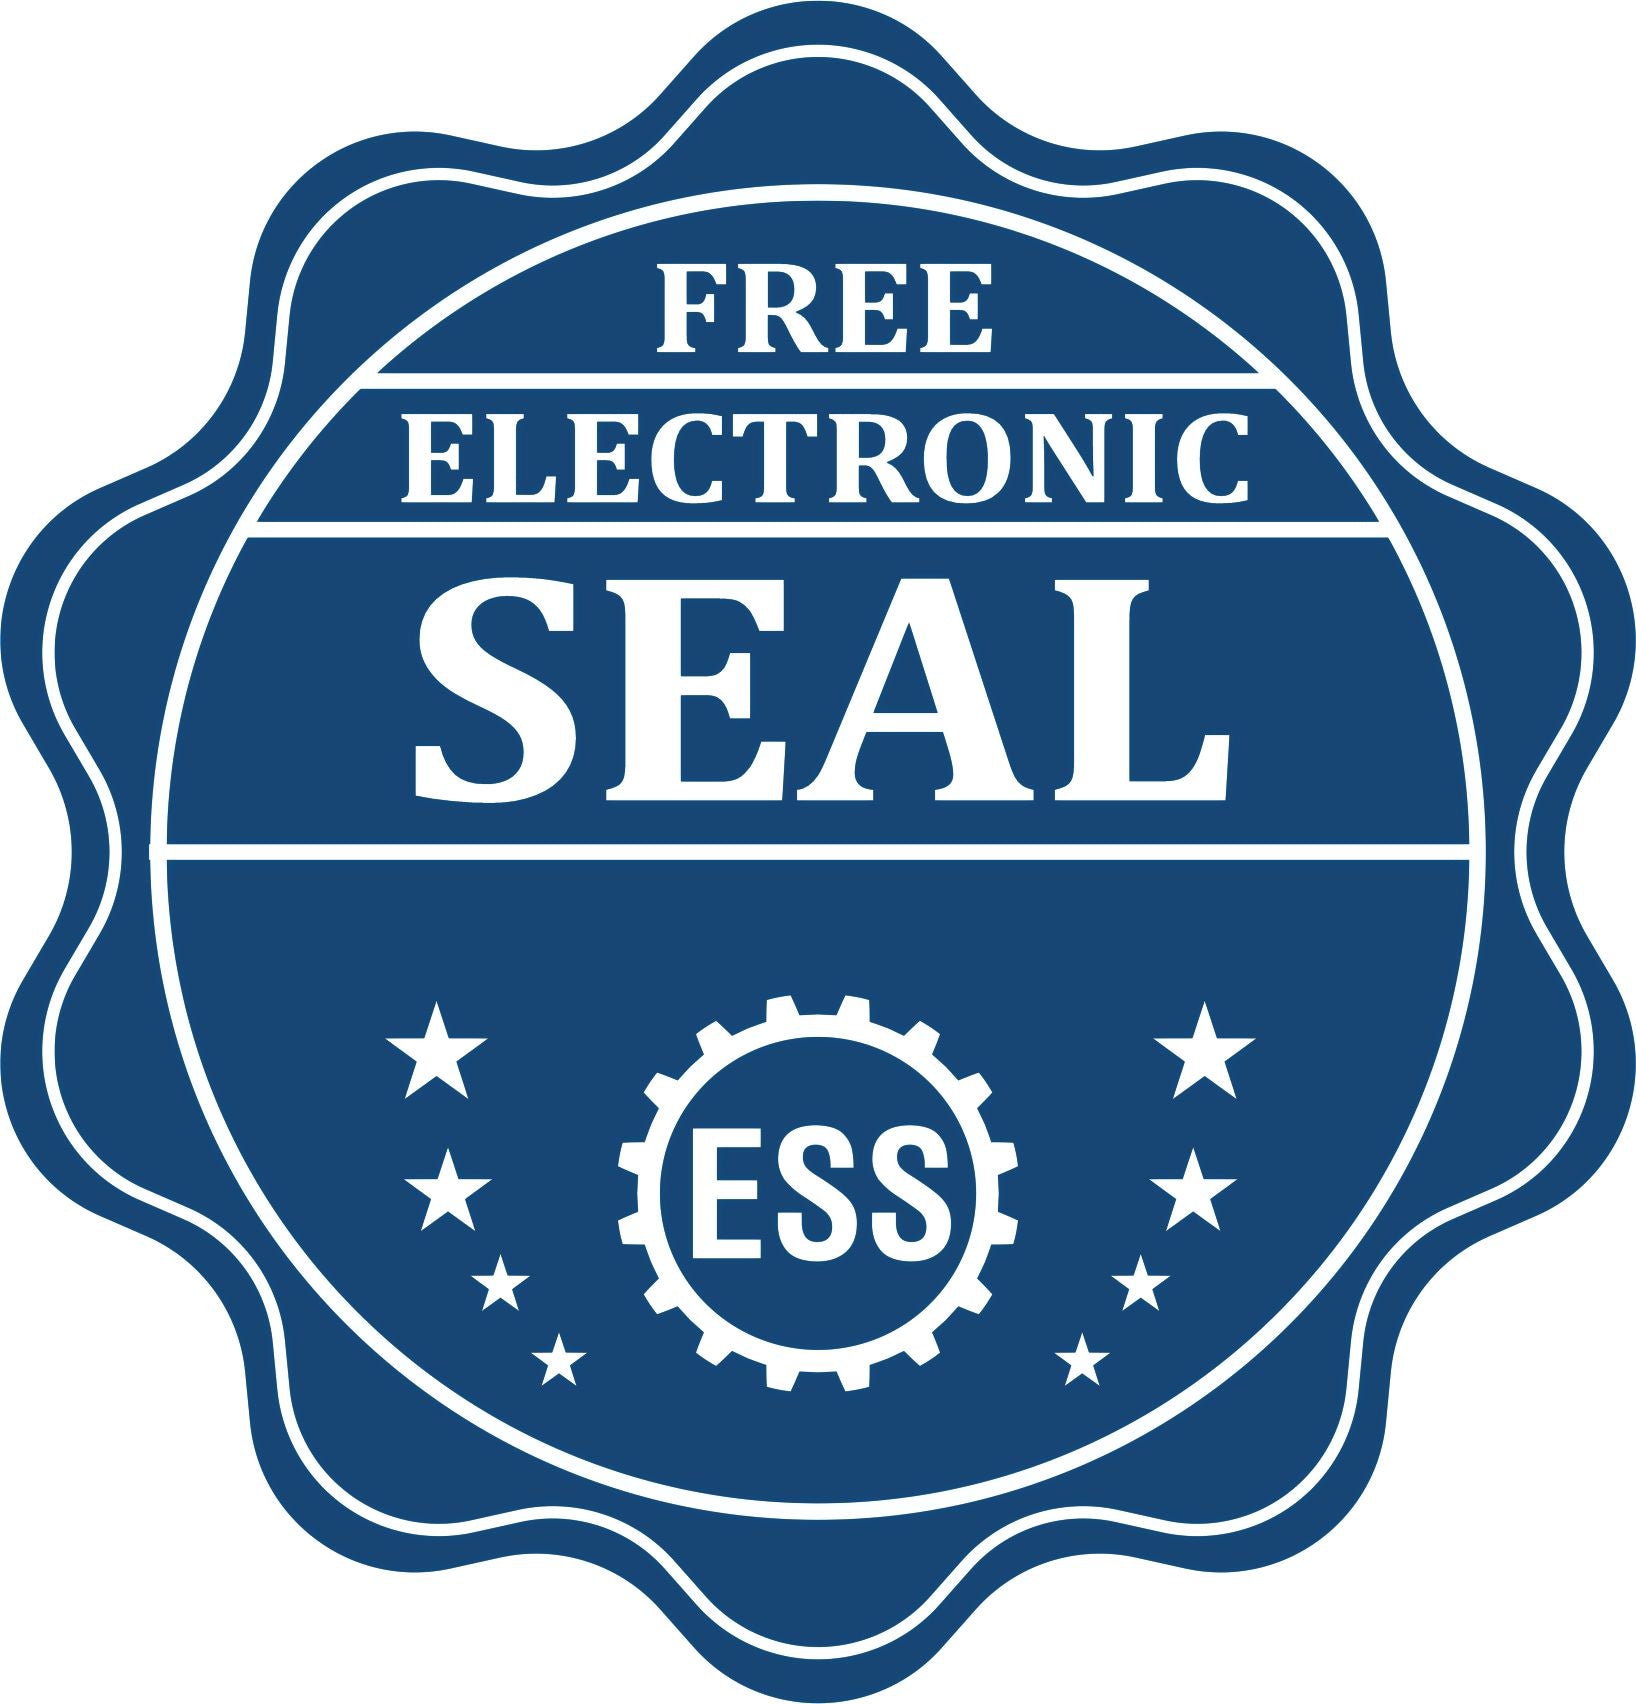 A badge showing a free electronic seal for the Slim Pre-Inked State Seal Notary Stamp for Connecticut with stars and the ESS gear on the emblem.